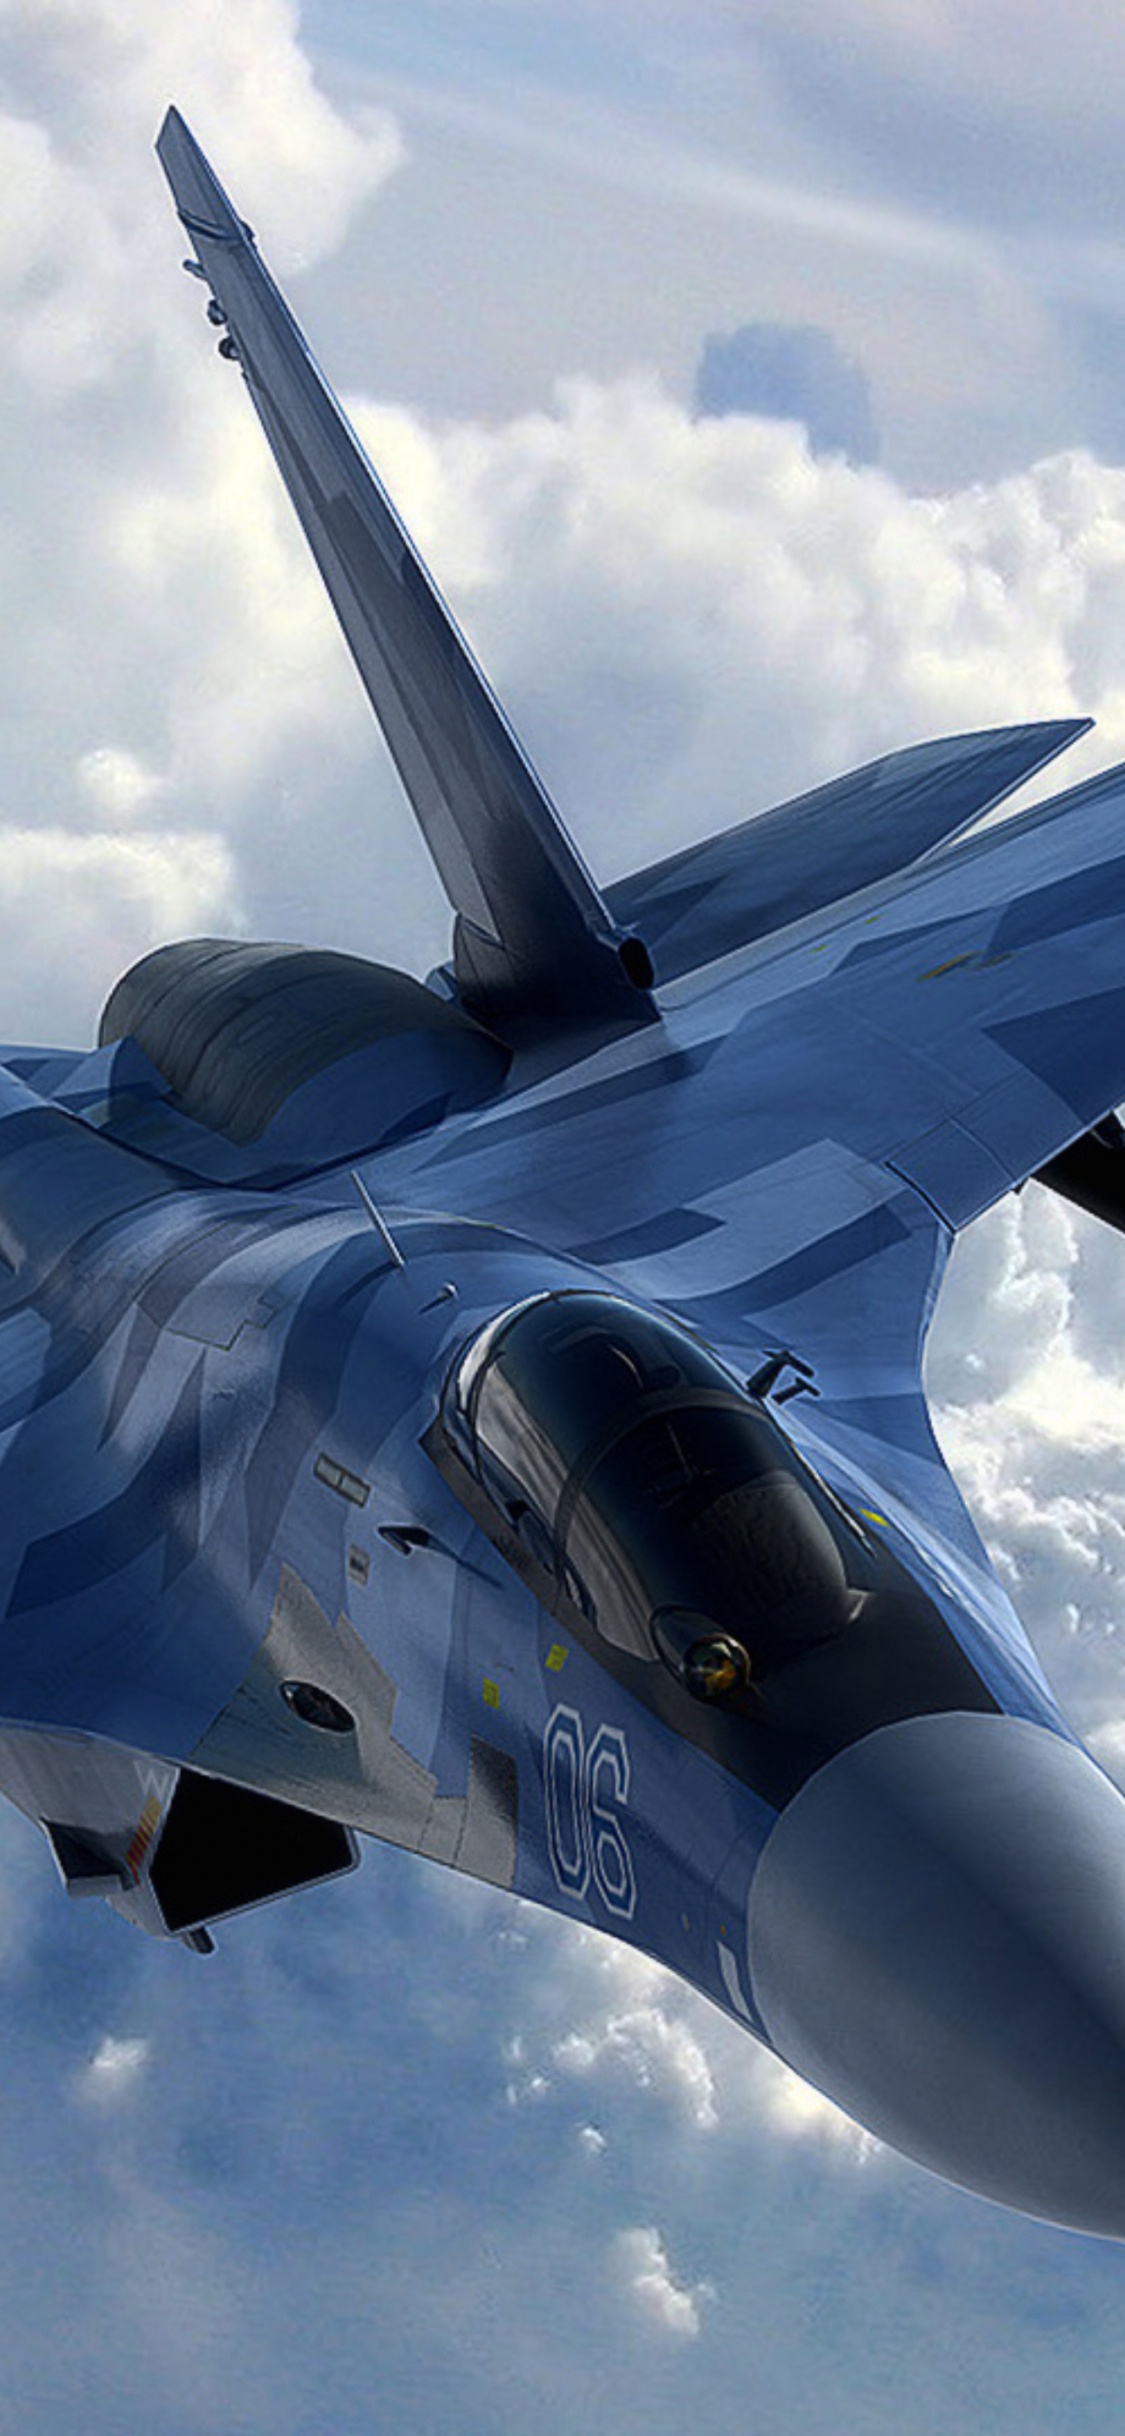 Sukhoi Su 57 wallpapers for desktop download free Sukhoi Su 57 pictures  and backgrounds for PC  moborg